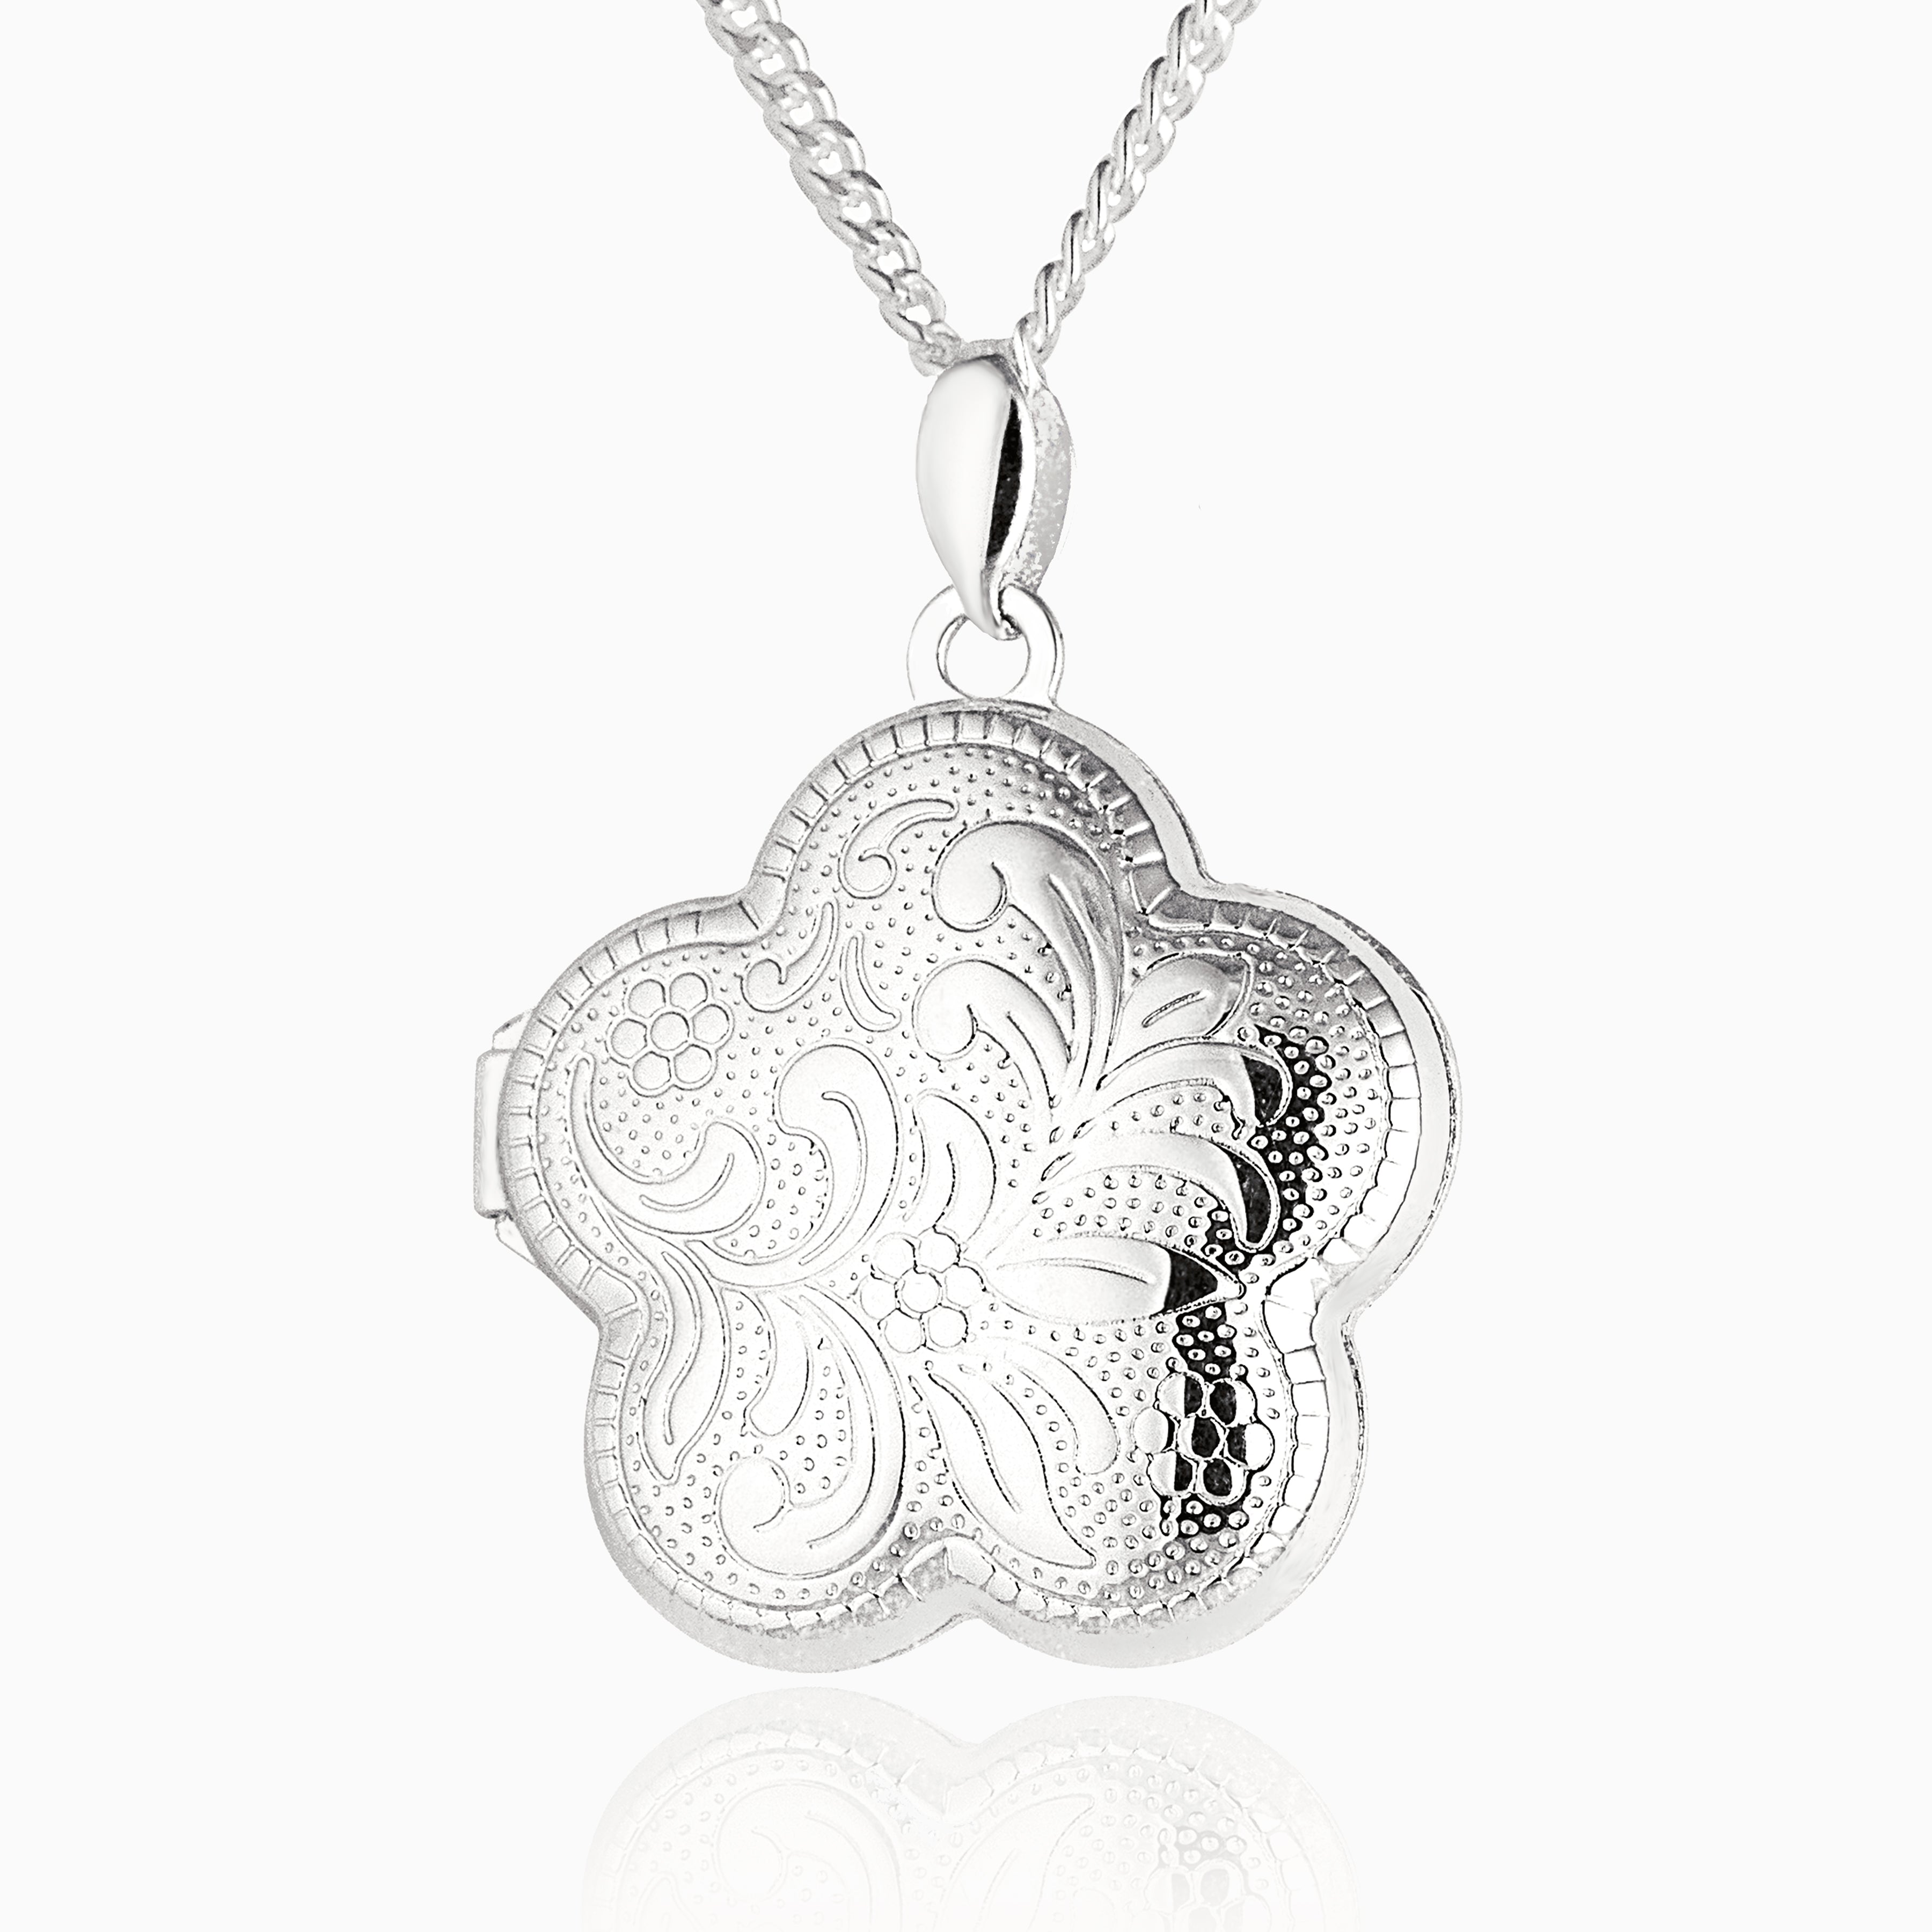 Product title: Flower Shaped Silver Locket, product type: Necklaces